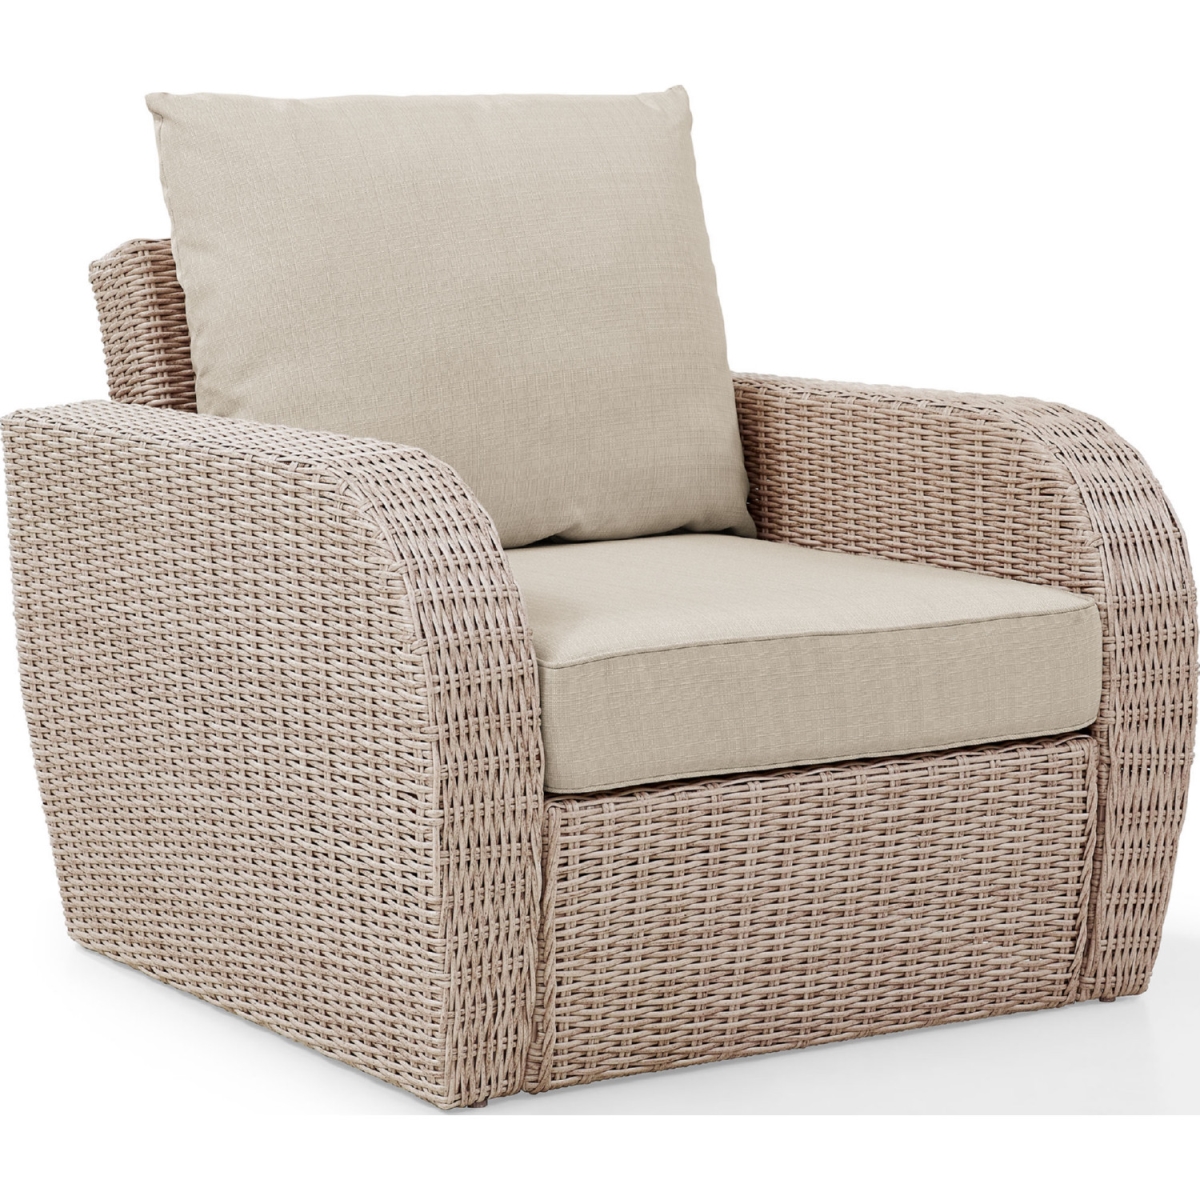 Ko70141wh-ol St. Augustine Outdoor Wicker Arm Chair, Weathered White With Universal Oatmeal Cushion